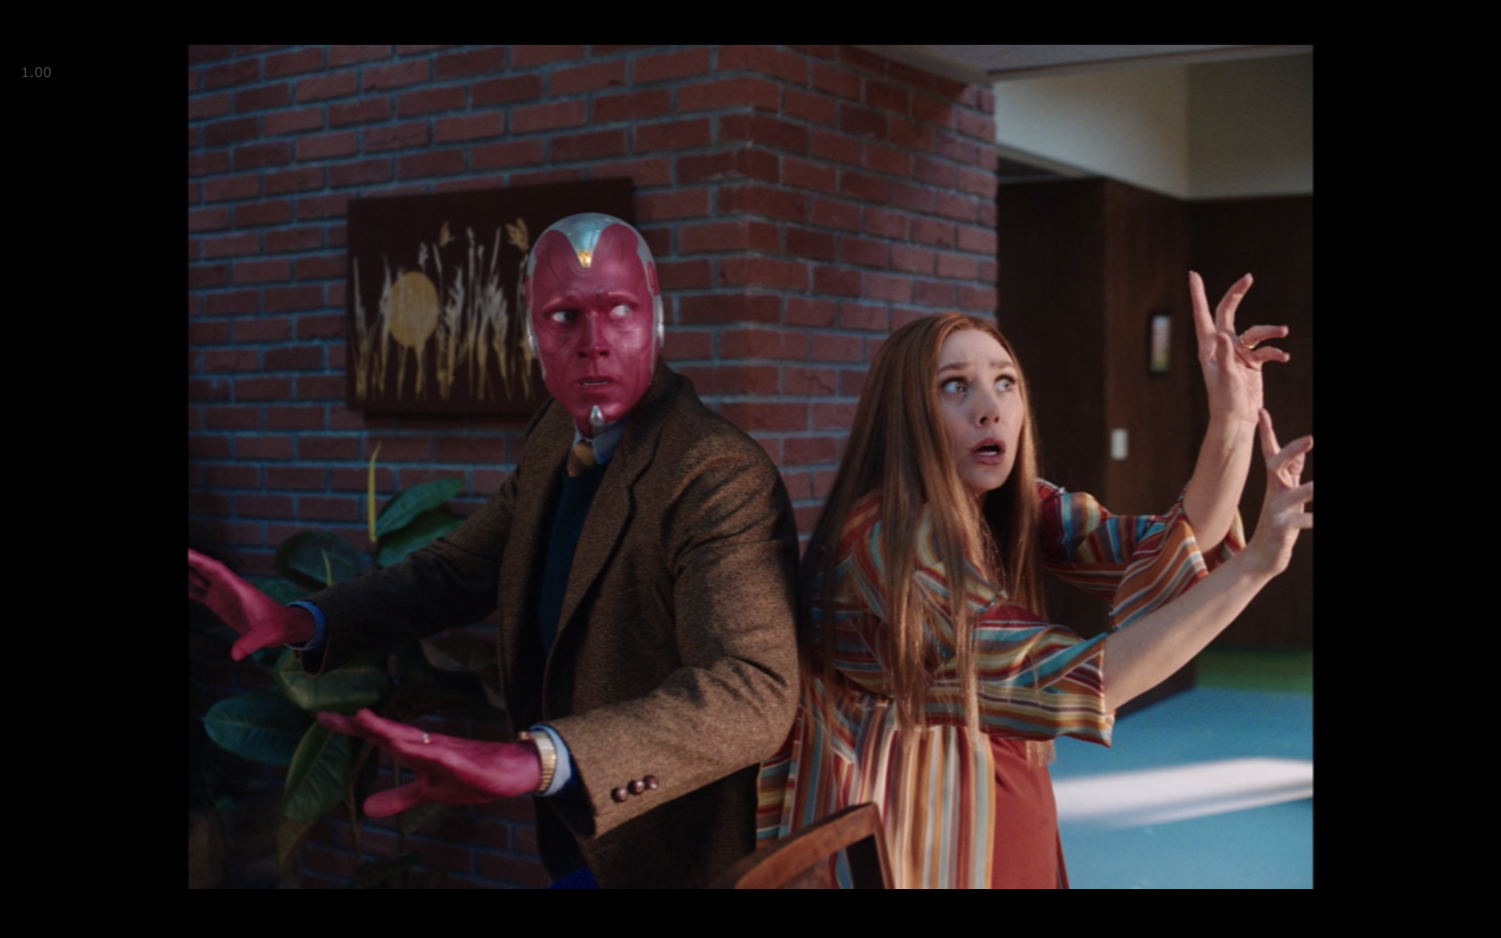 Wanda’s telekinetic powers go haywire in the latest episode of “WandaVision, but it’s nothing she and Vision can’t handle—especially through wacky 70s humor. (Marvel Studios/WandaVision)